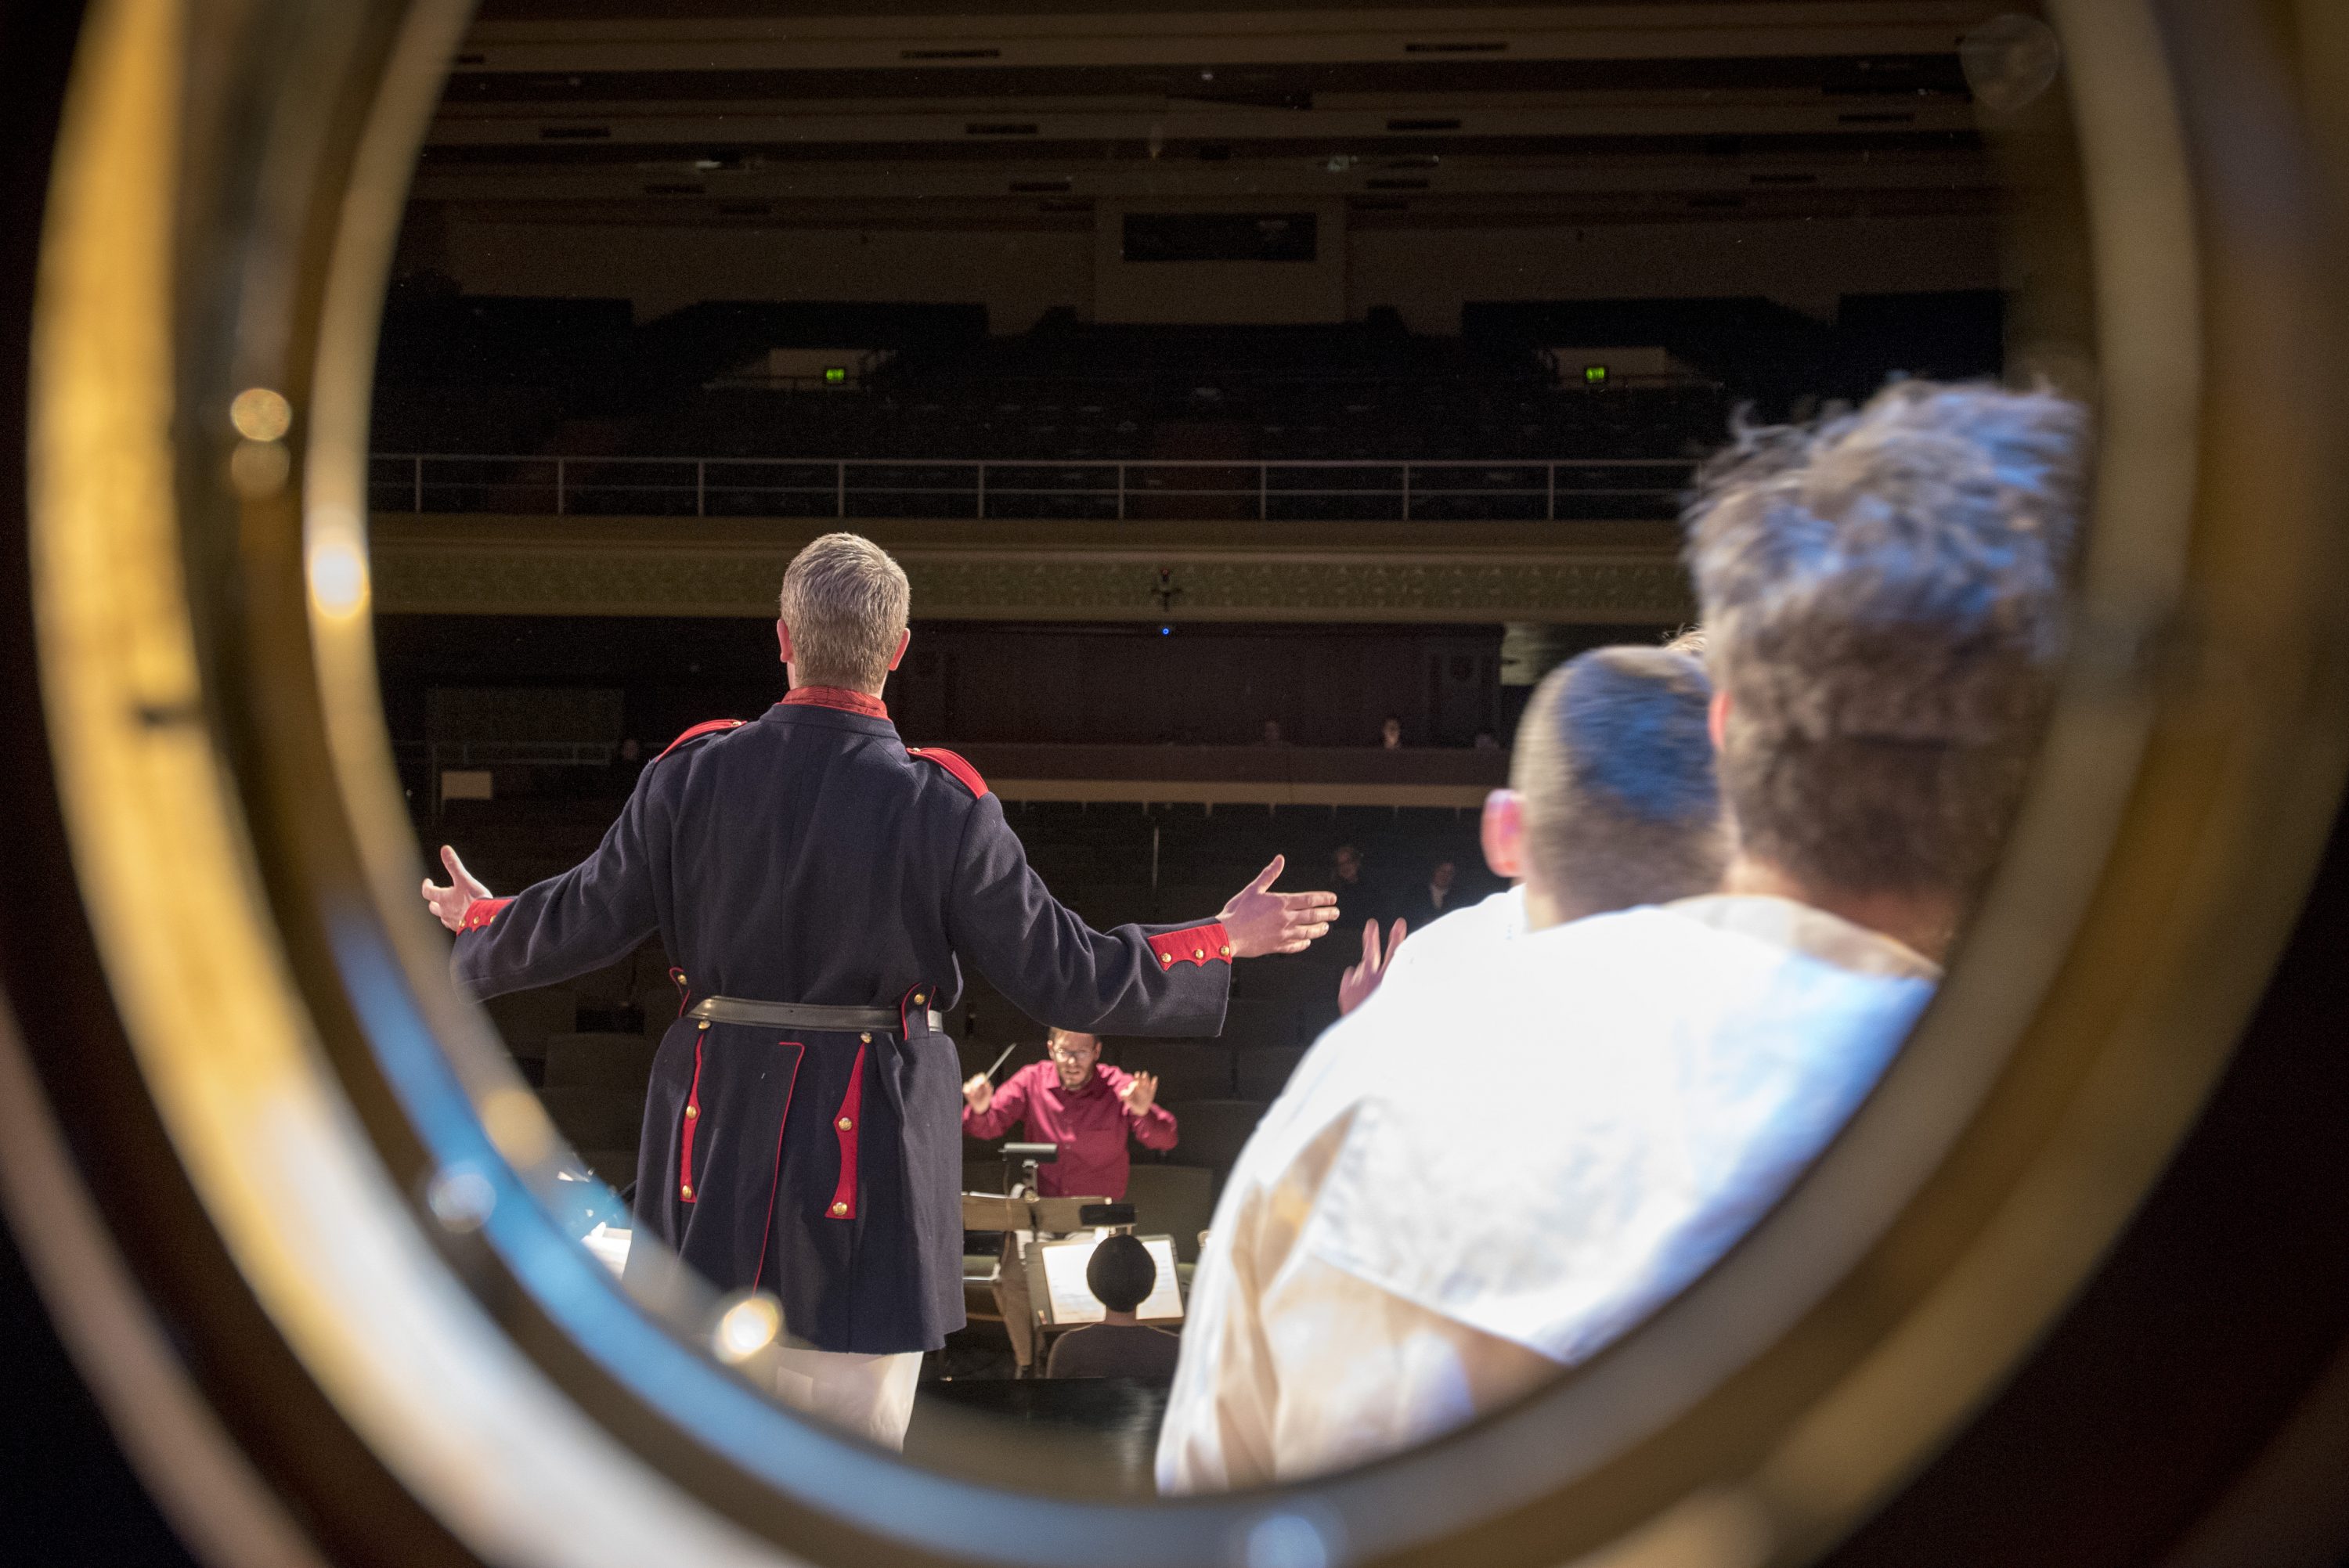 Photos taken from backstage at Jorgensen Center for the Performing Arts during the UConn Opera production of Gilbert & Sullivan's comic operetta H.M.S. Pinafore on Jan. 24, 2017. (Sean Flynn/UConn Photo)